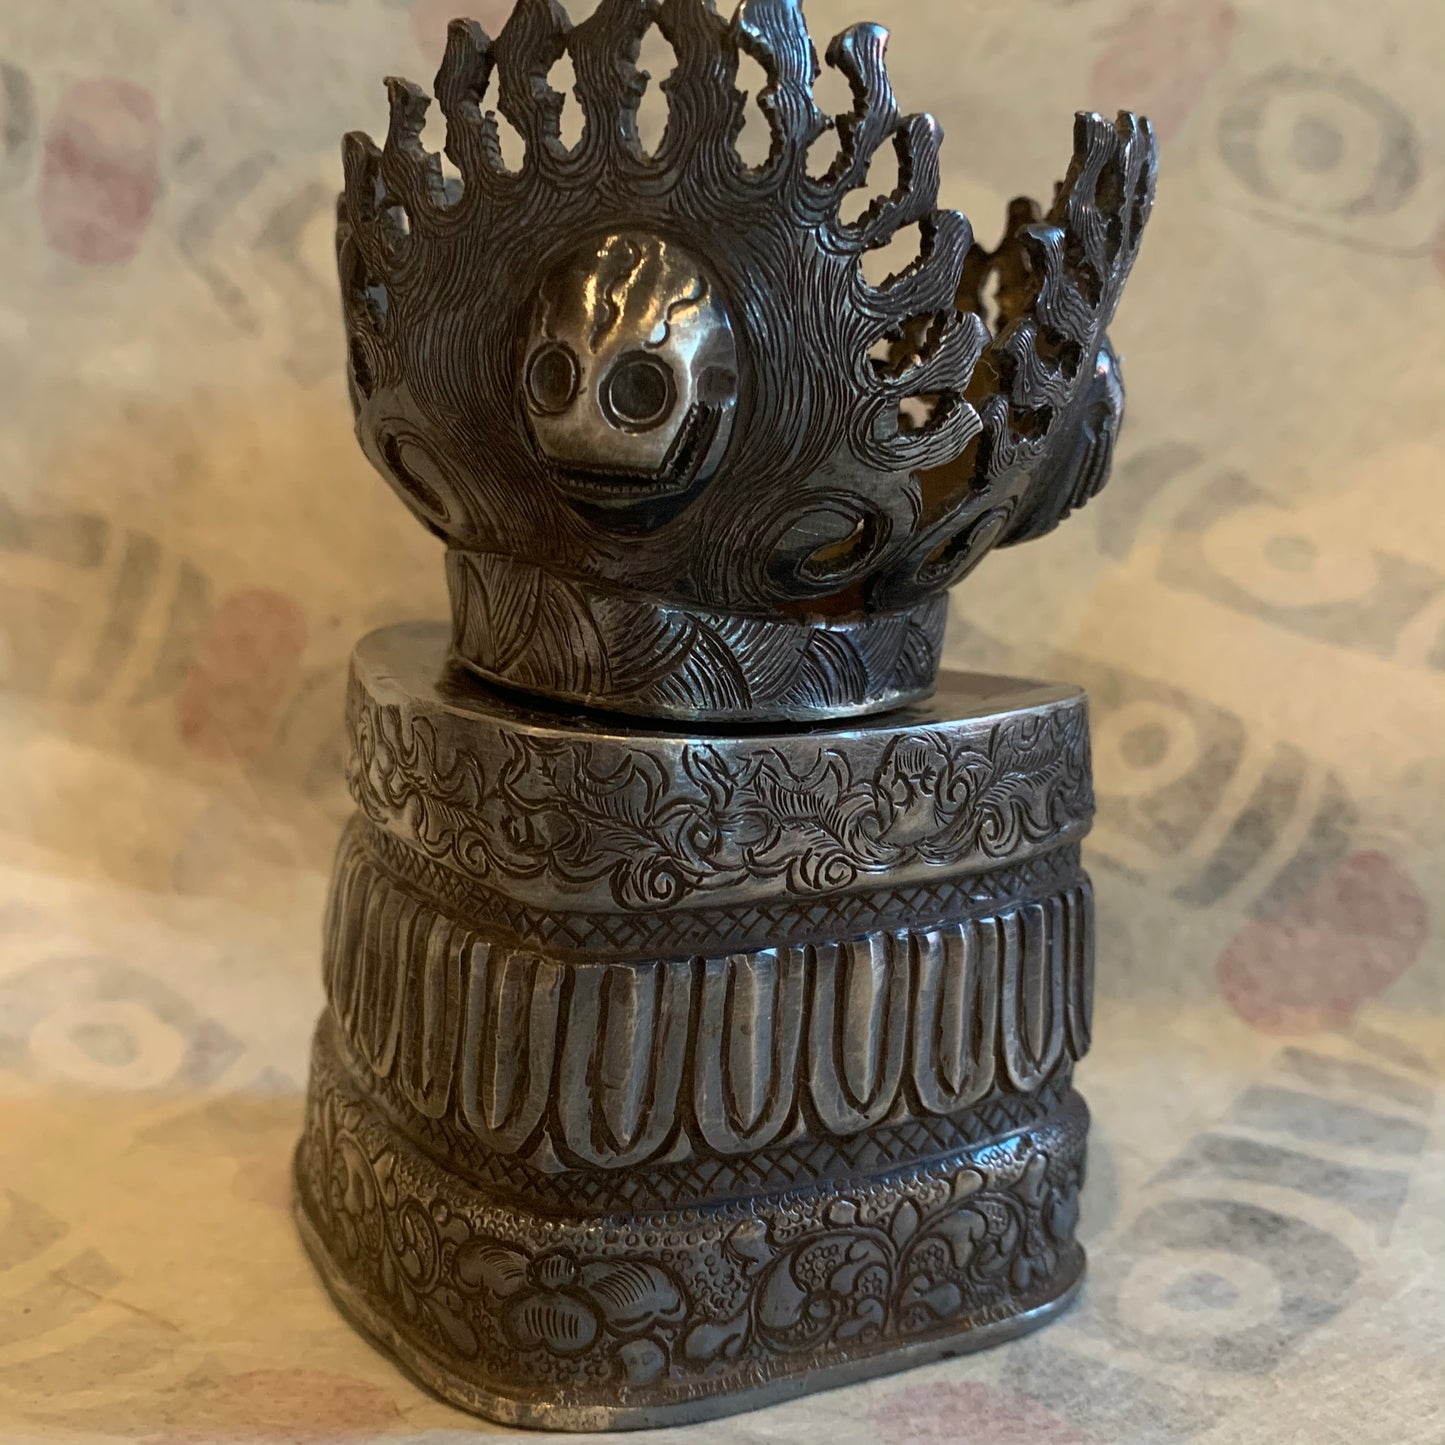 An antique silver kapala stand and cover